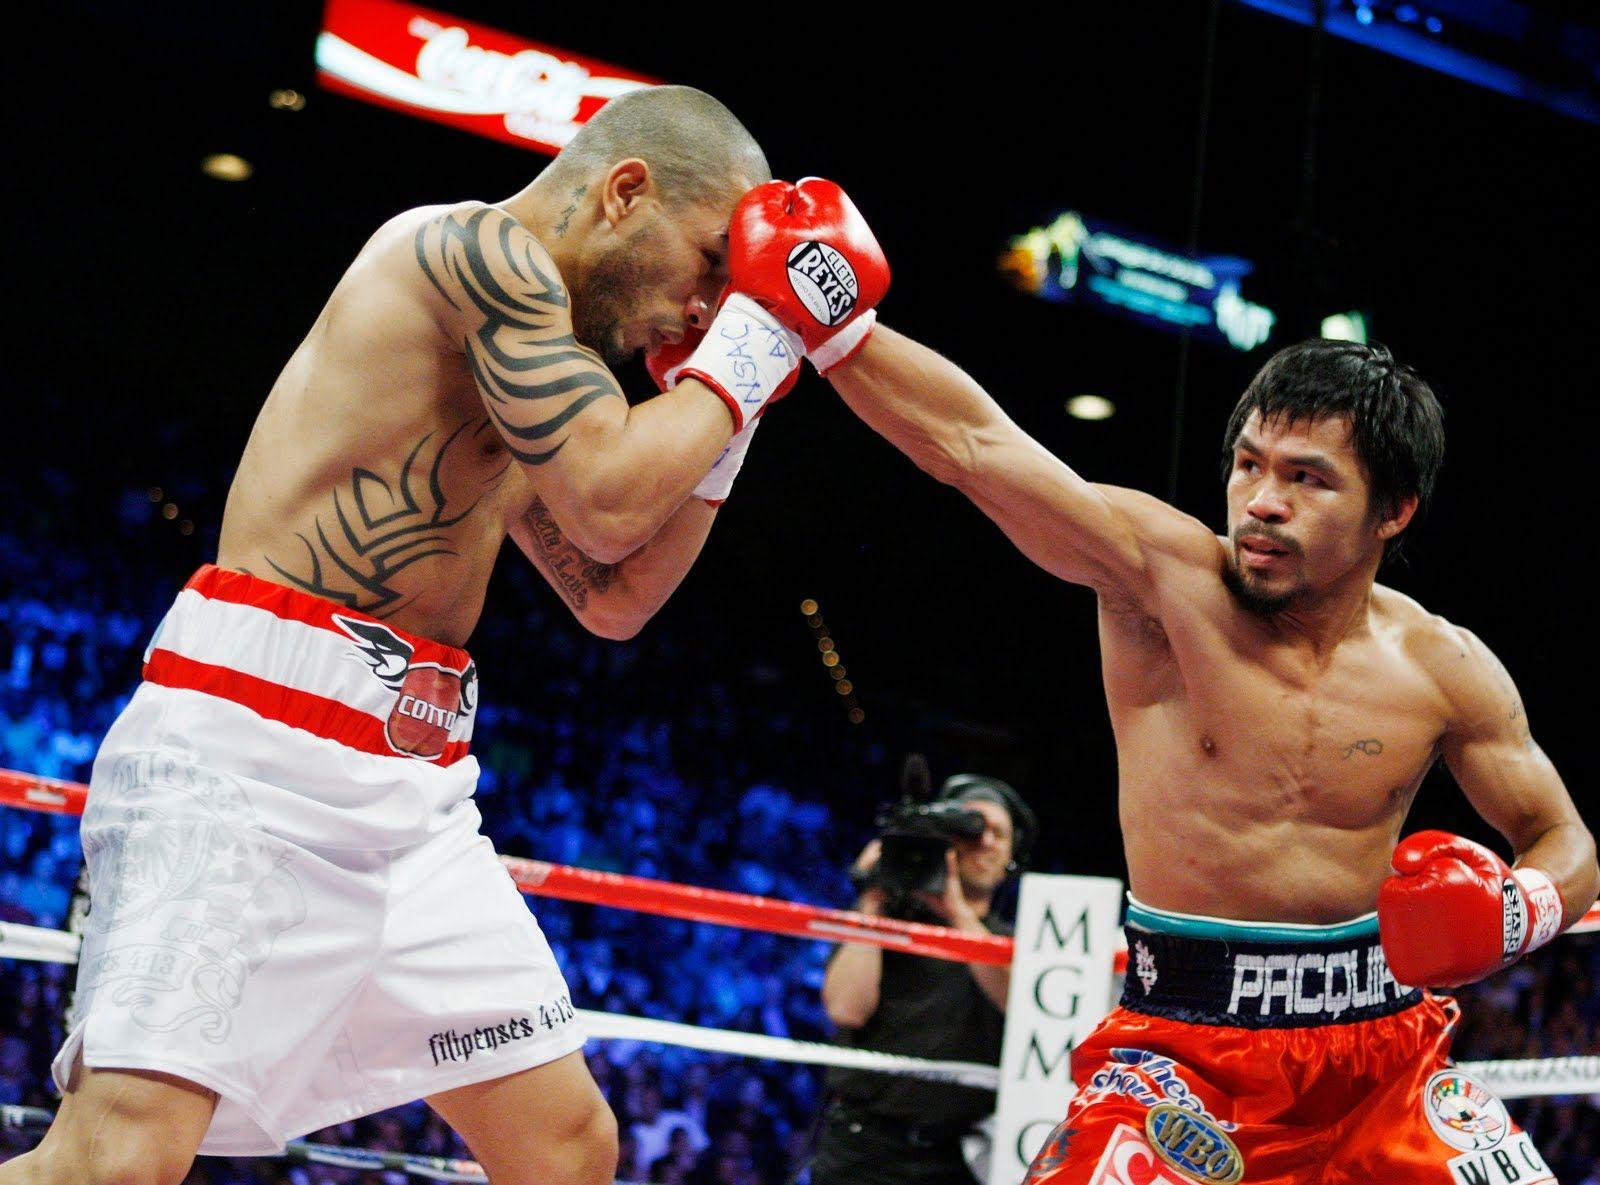 High Quality Manny Pacquiao Wallpaper. Full HD Picture